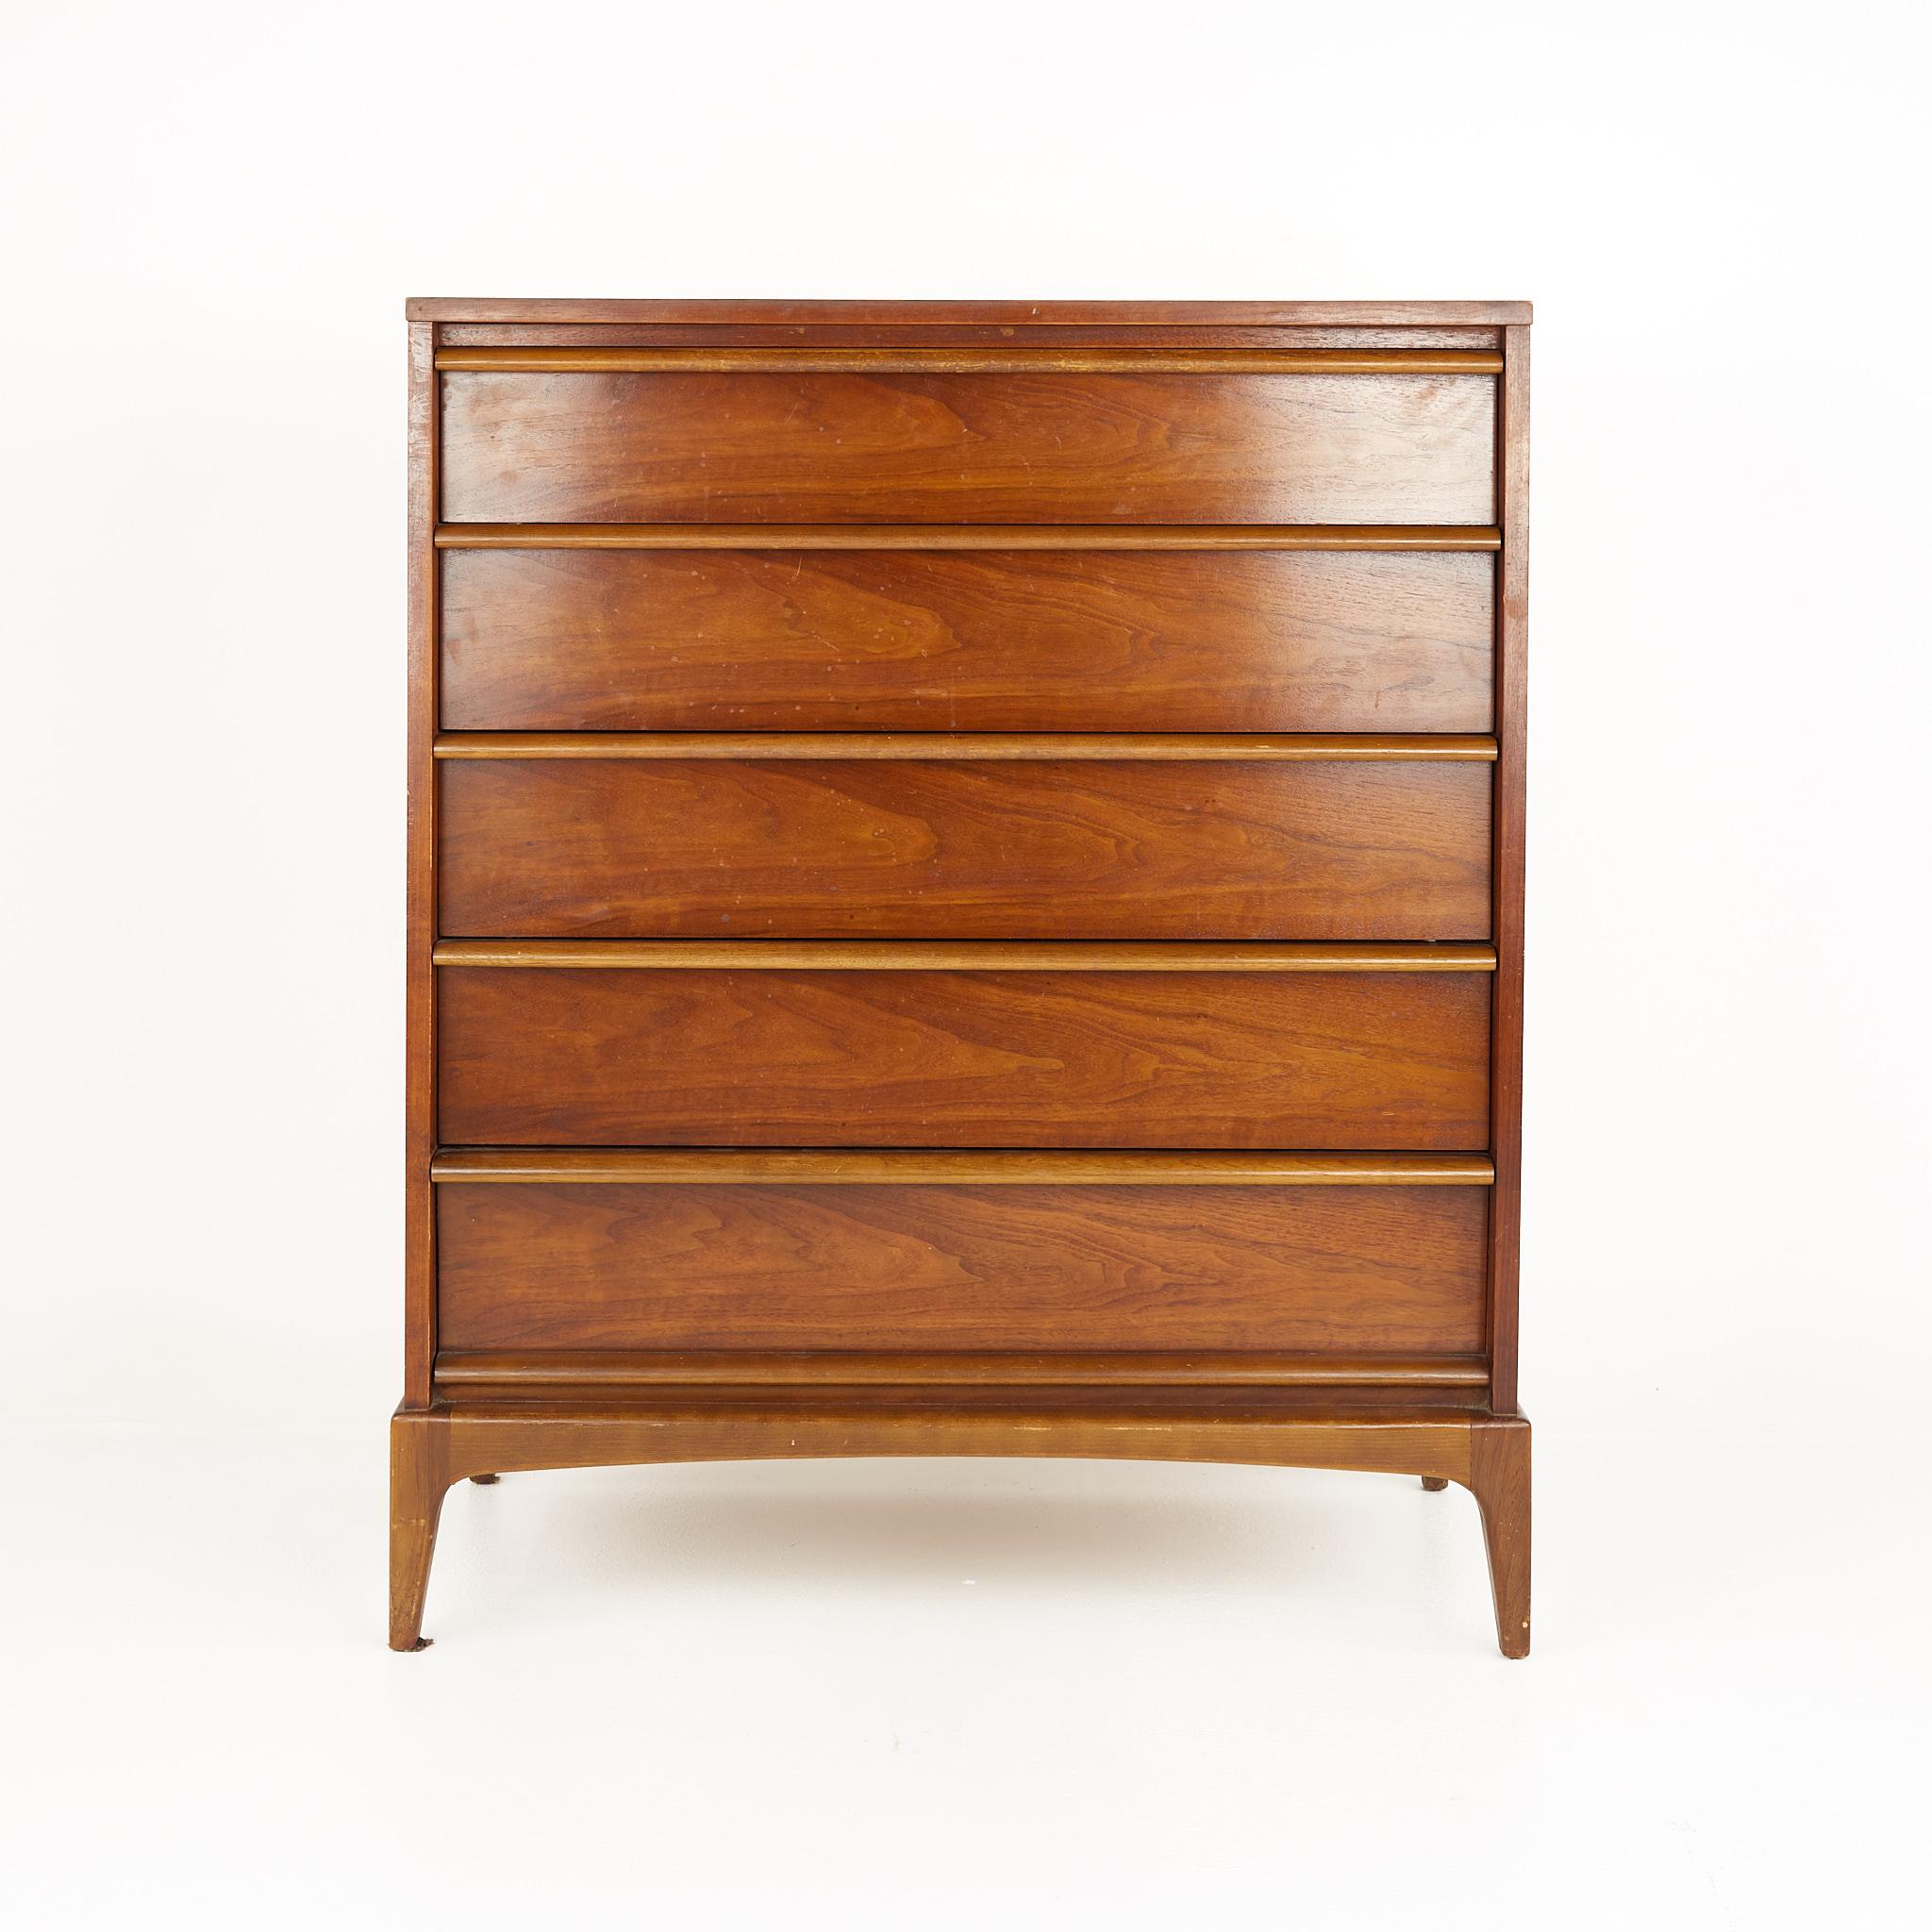 Lane Rhythm mid century walnut highboy dresser

This dresser measures: 36 wide x 18 deep x 44 inches high

?All pieces of furniture can be had in what we call restored vintage condition. That means the piece is restored upon purchase so it’s